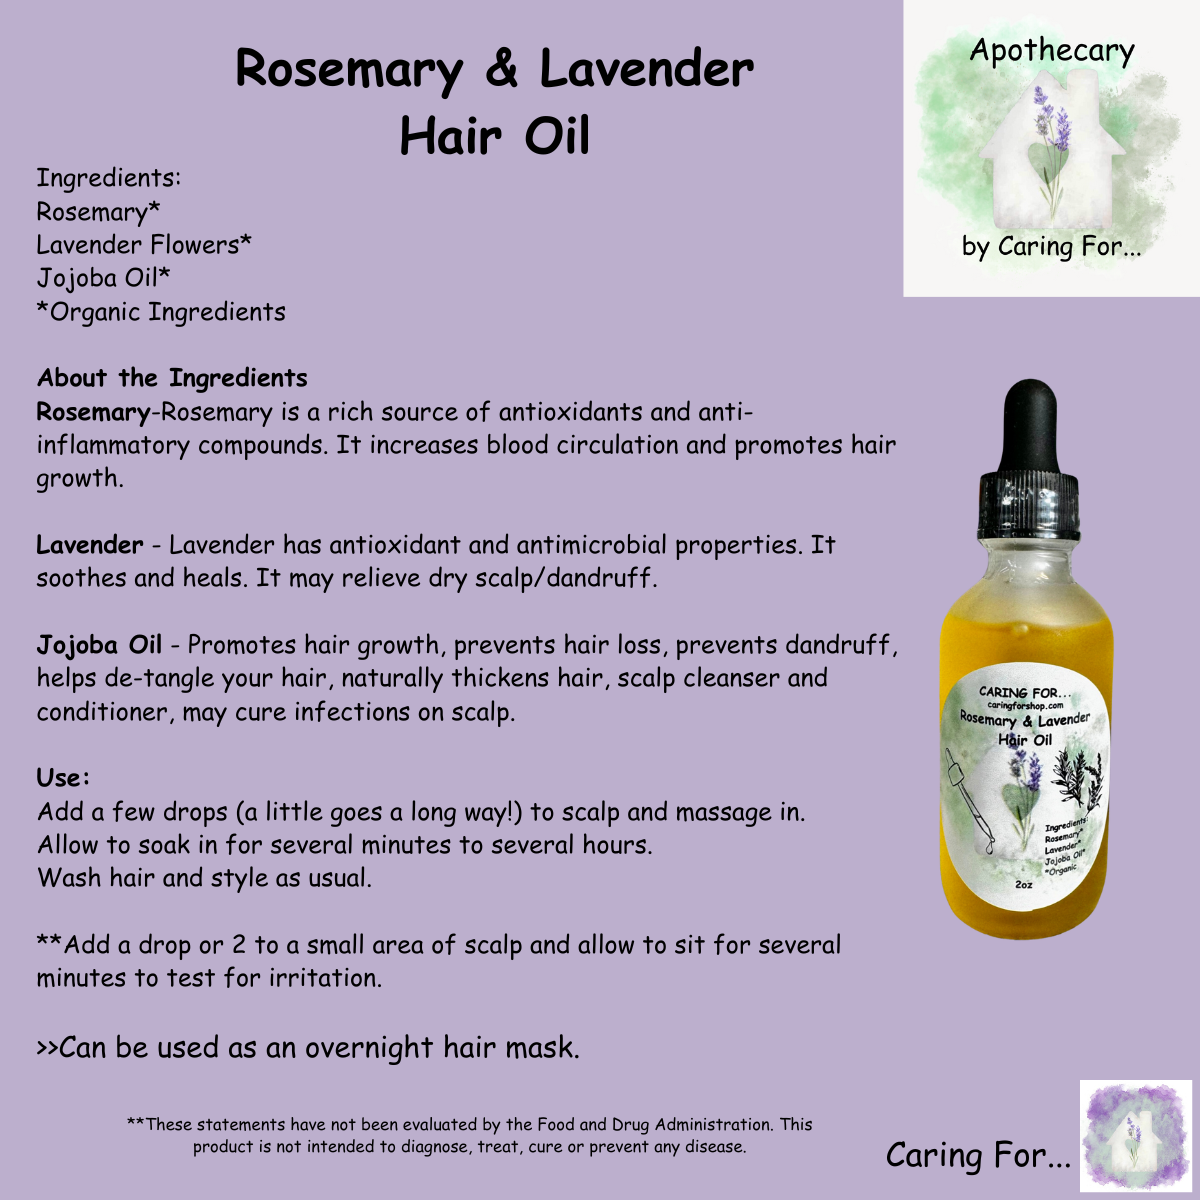 Rosemary & Lavender Hair Oil | Rosemary & Lavender Infused Jojoba Oil | 2oz | Apothecary by Caring For...